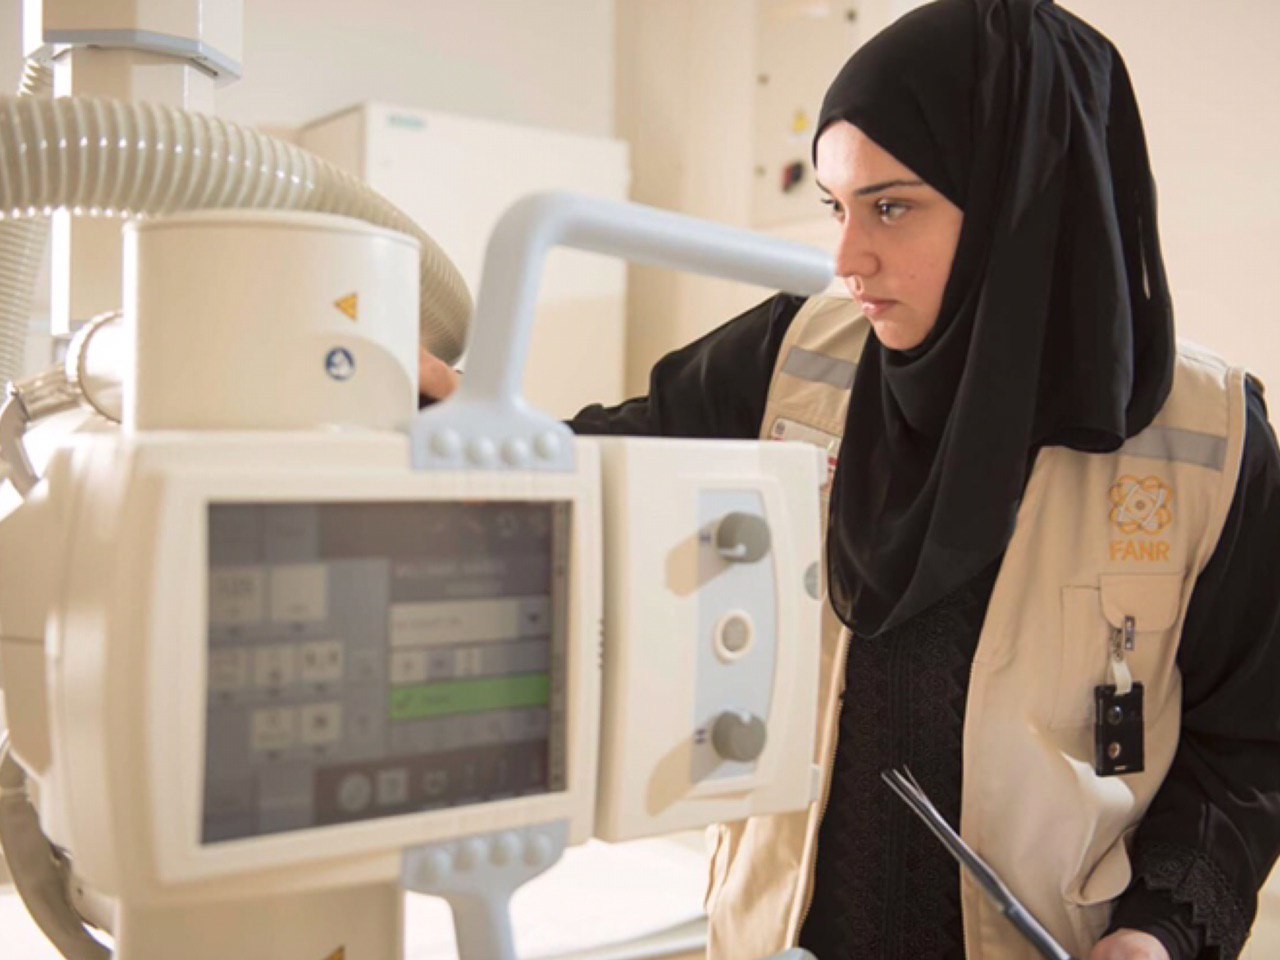 1,088 Licences Issued To Conduct Activities Using Radiation Sources In Medical And Non-Medical Fields: FANR’s Annual Report 2019